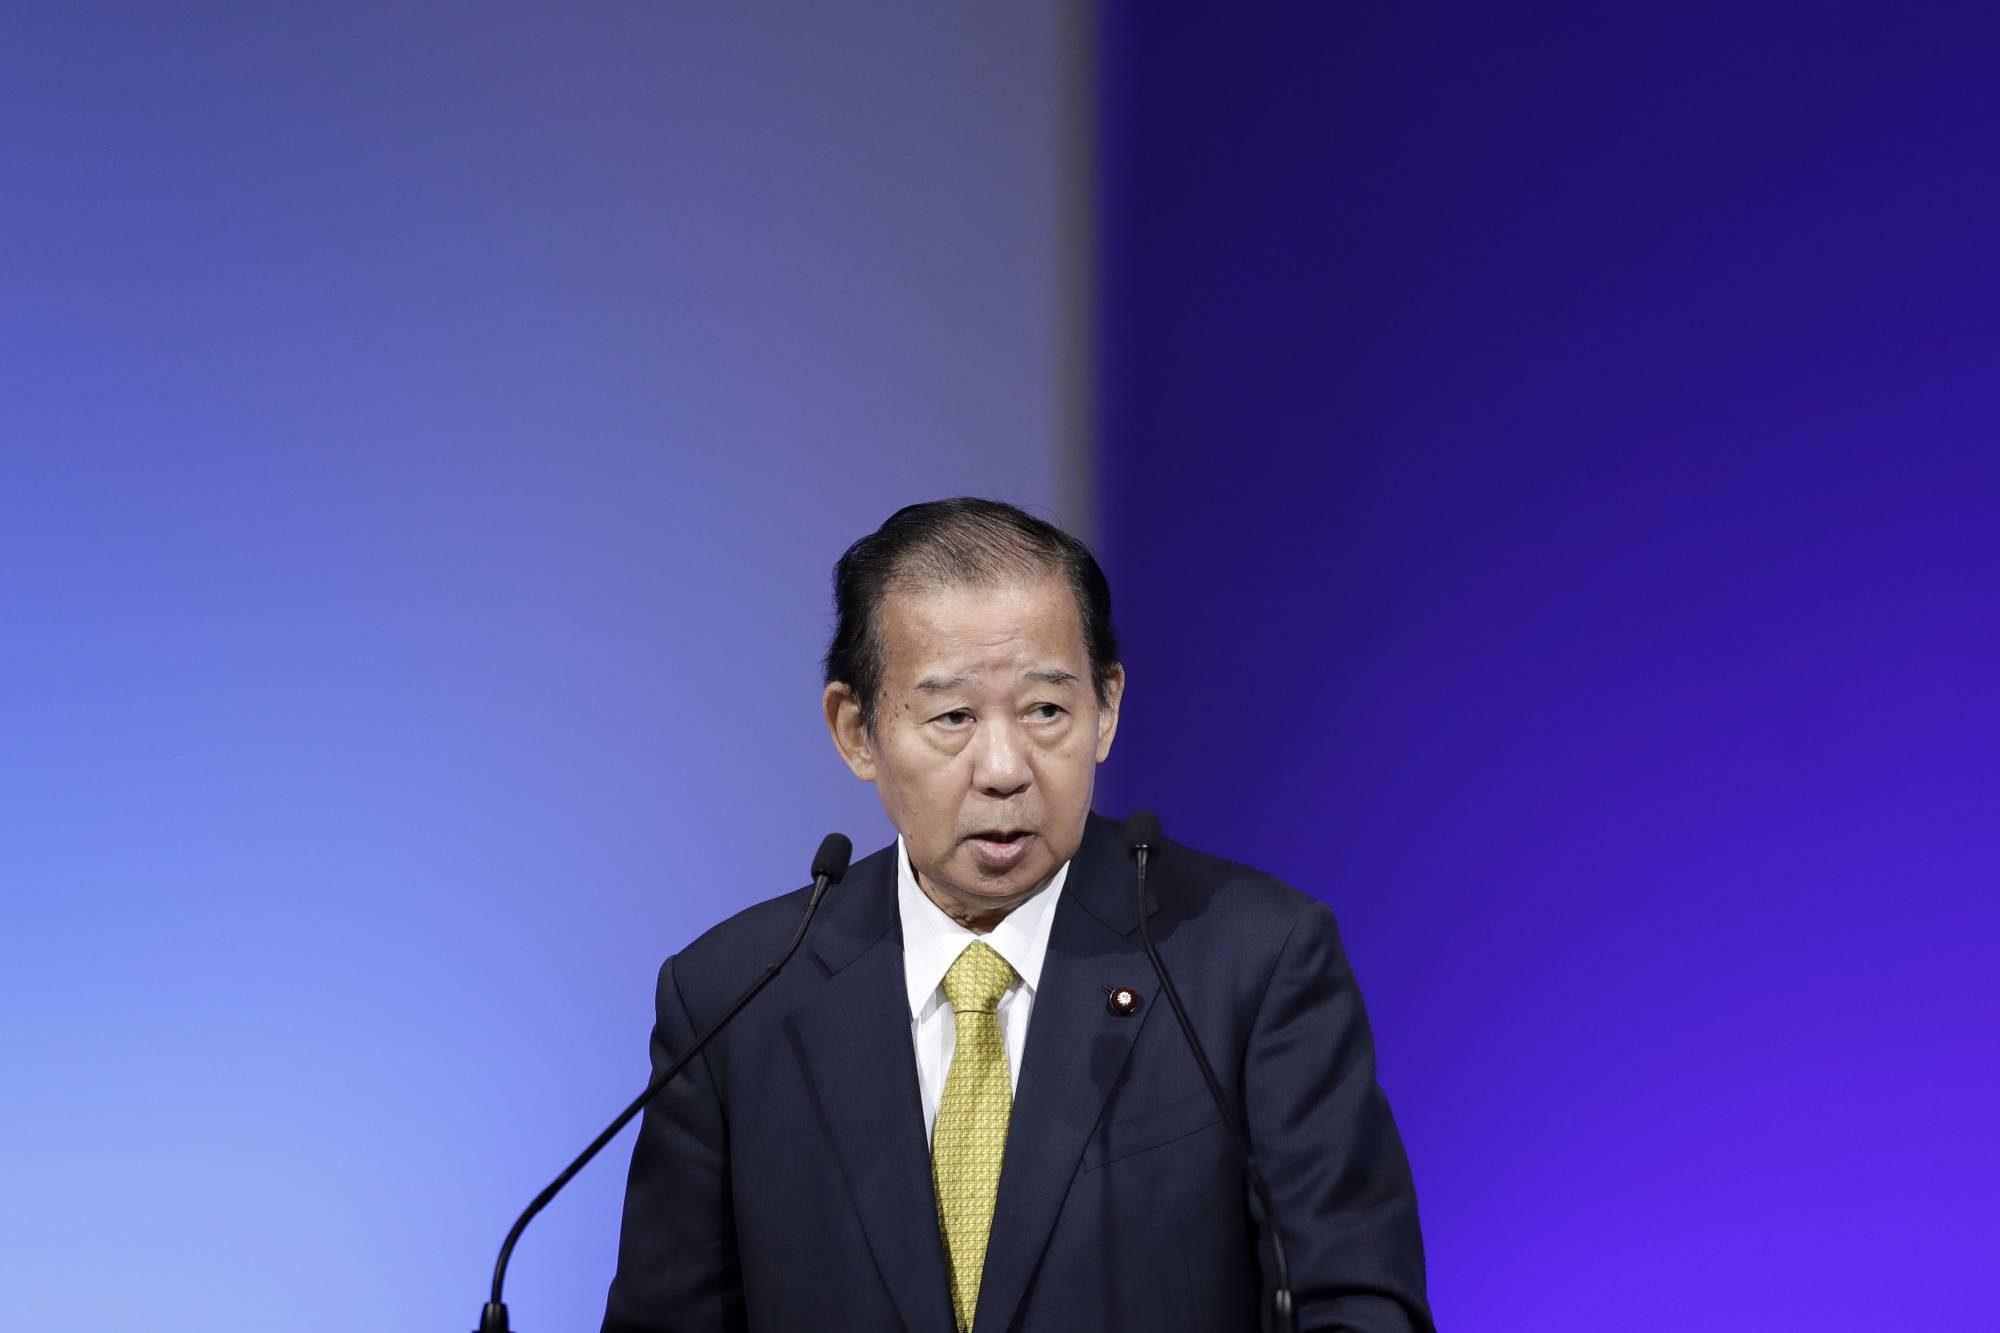 Liberal Democratic Party Secretary-General Toshihiro Nikai speaks at his party's annual convention in 2019. | BLOOMBERG